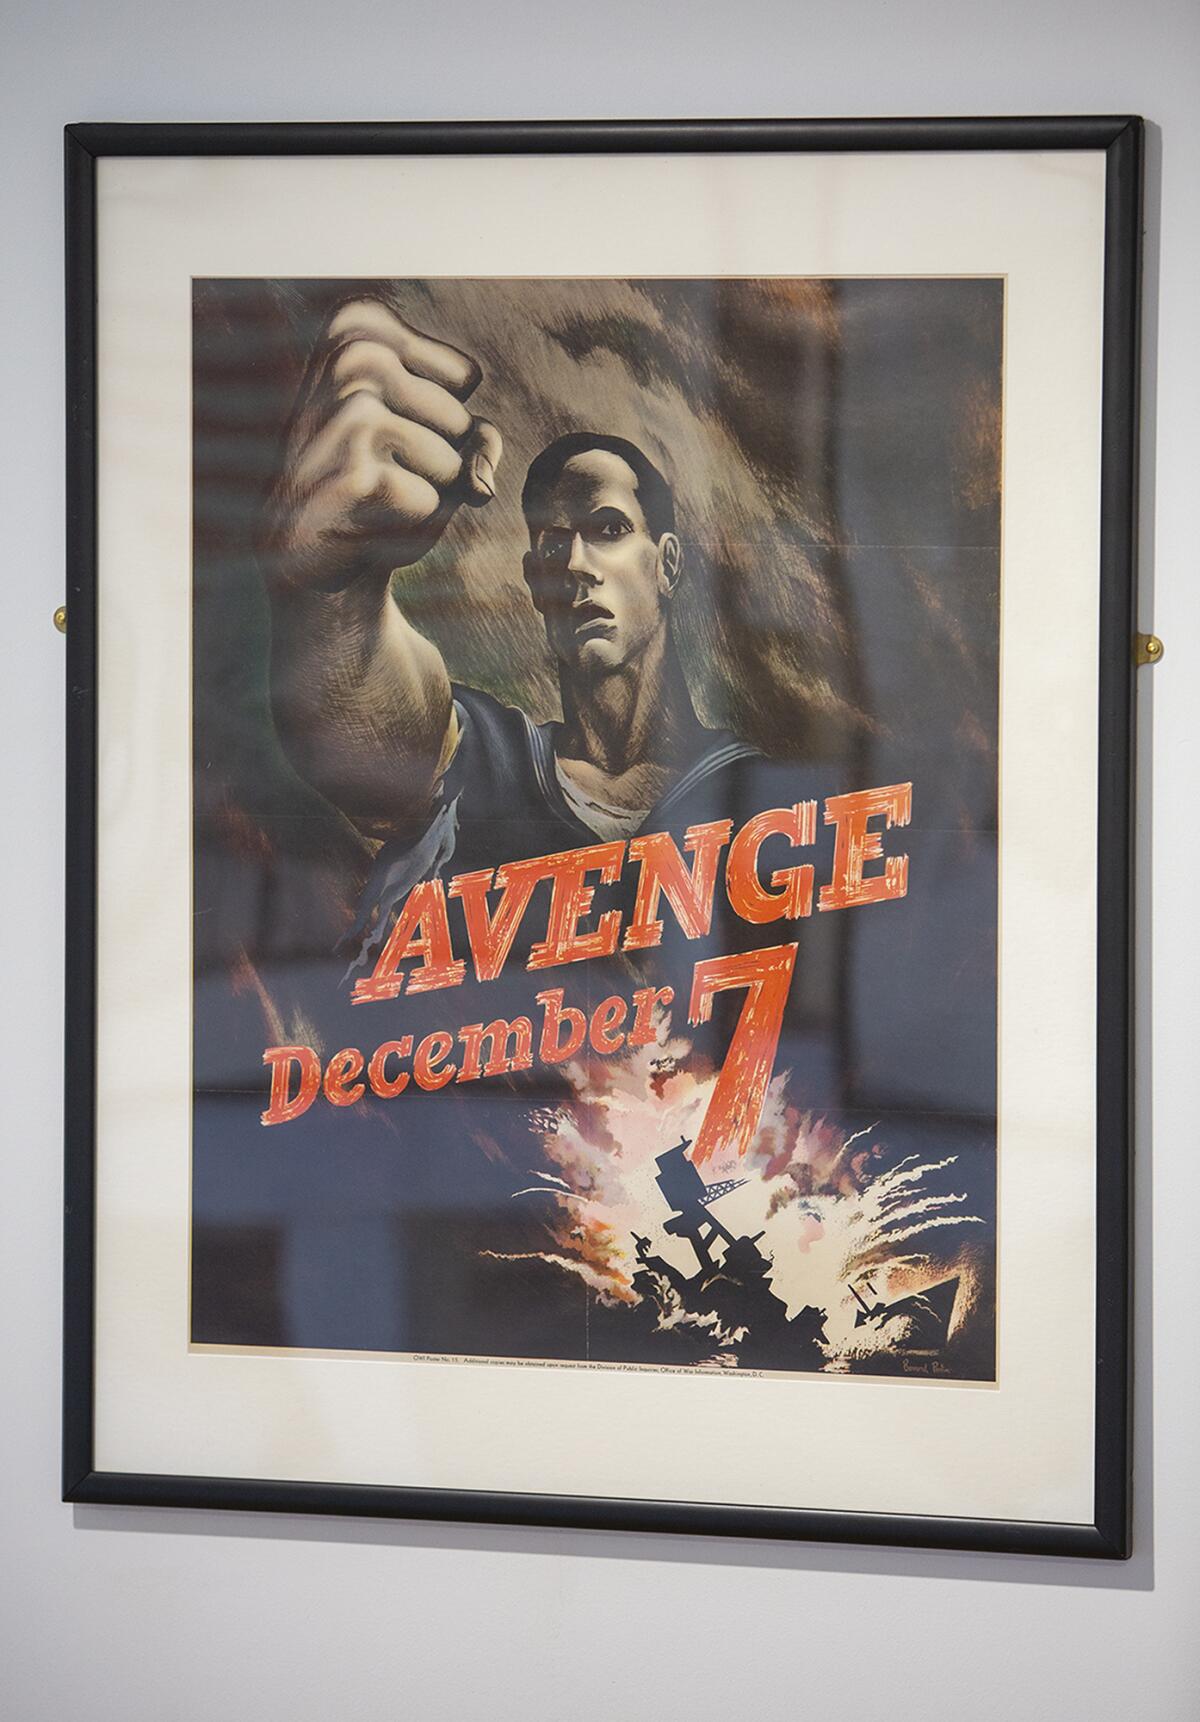 A poster in the "Fighting on the Home Front" exhibit at Heroes Hall in Costa Mesa refers to the Japanese attack on Pearl Harbor in 1941 that led to the United States entering World War II.